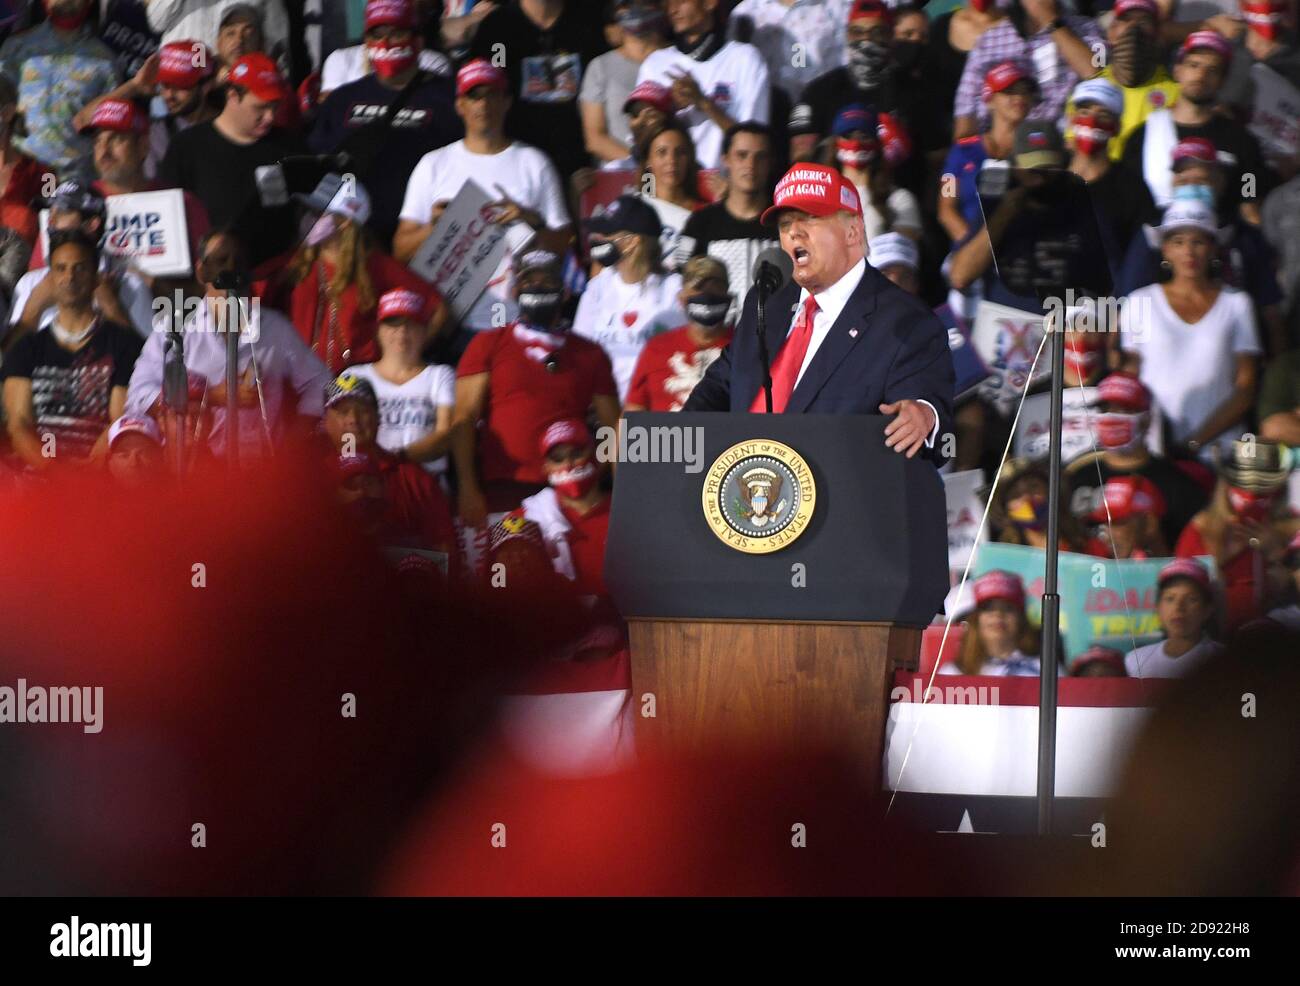 Opa Locka, United States. 01st Nov, 2020. November 1, 2020 - Opa-Locka, Florida, United States - U.S. President Donald Trump speaks at a campaign rally at Miami-Opa Locka Executive Airport on November 1, 2020 in Opa-Locka, Florida. President Trump held events in five states today, as he continues his campaign against Democratic presidential nominee Joe Biden two days before the November 3 election. Credit: Paul Hennessy/Alamy Live News Stock Photo